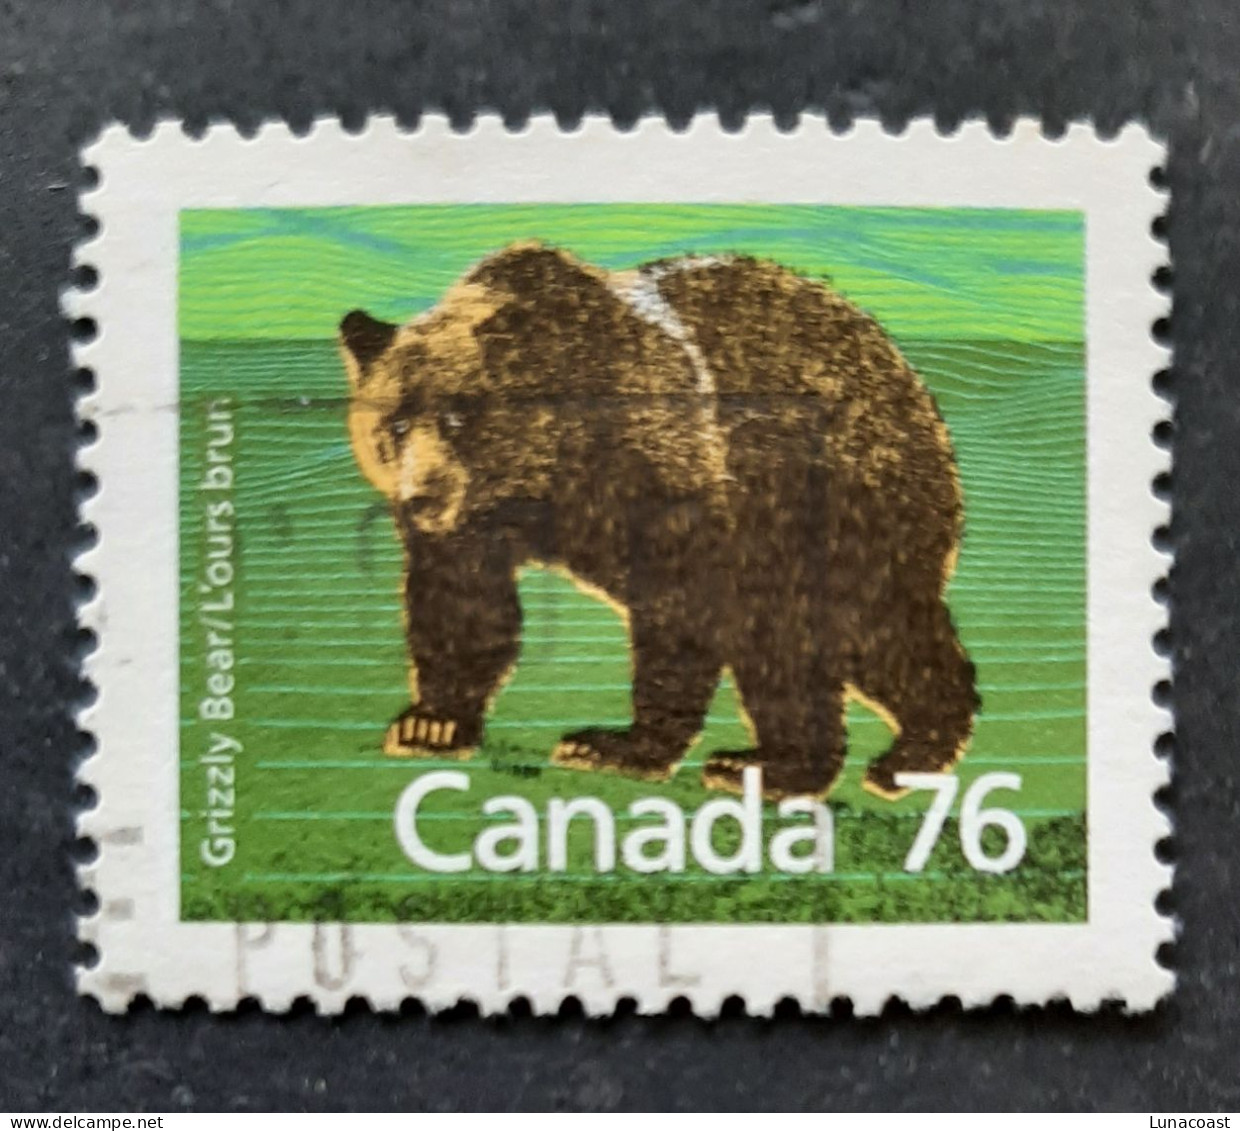 Canada 1989  USED  Sc1178a,   PERF. 12.5 X 13.1,  76c Grizzly Bear, - Used Stamps